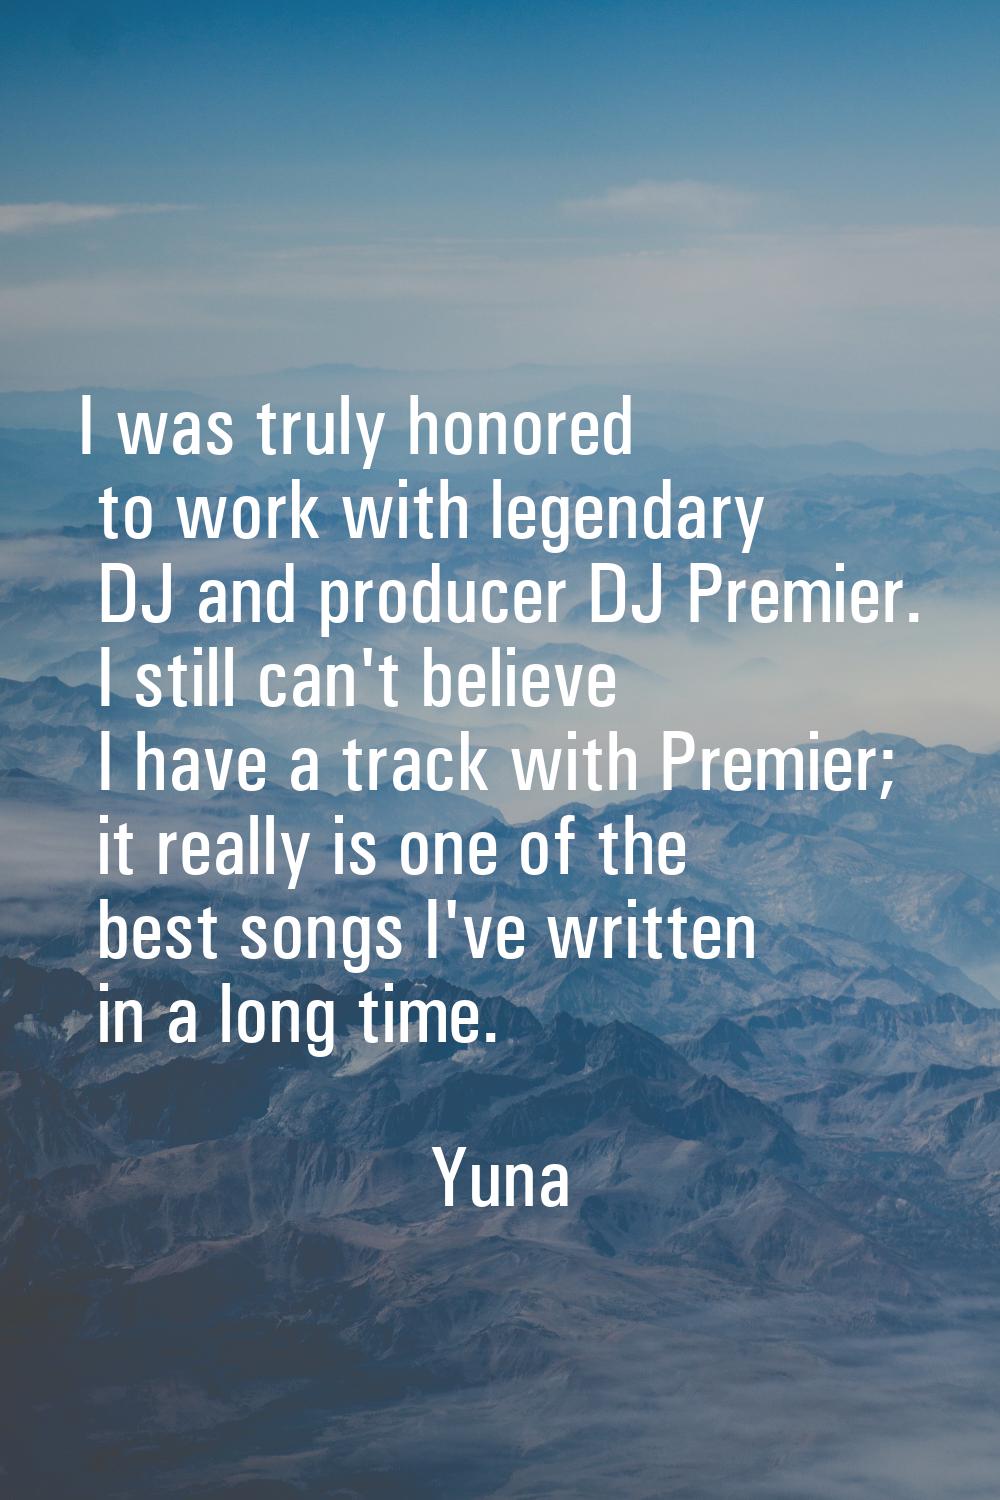 I was truly honored to work with legendary DJ and producer DJ Premier. I still can't believe I have